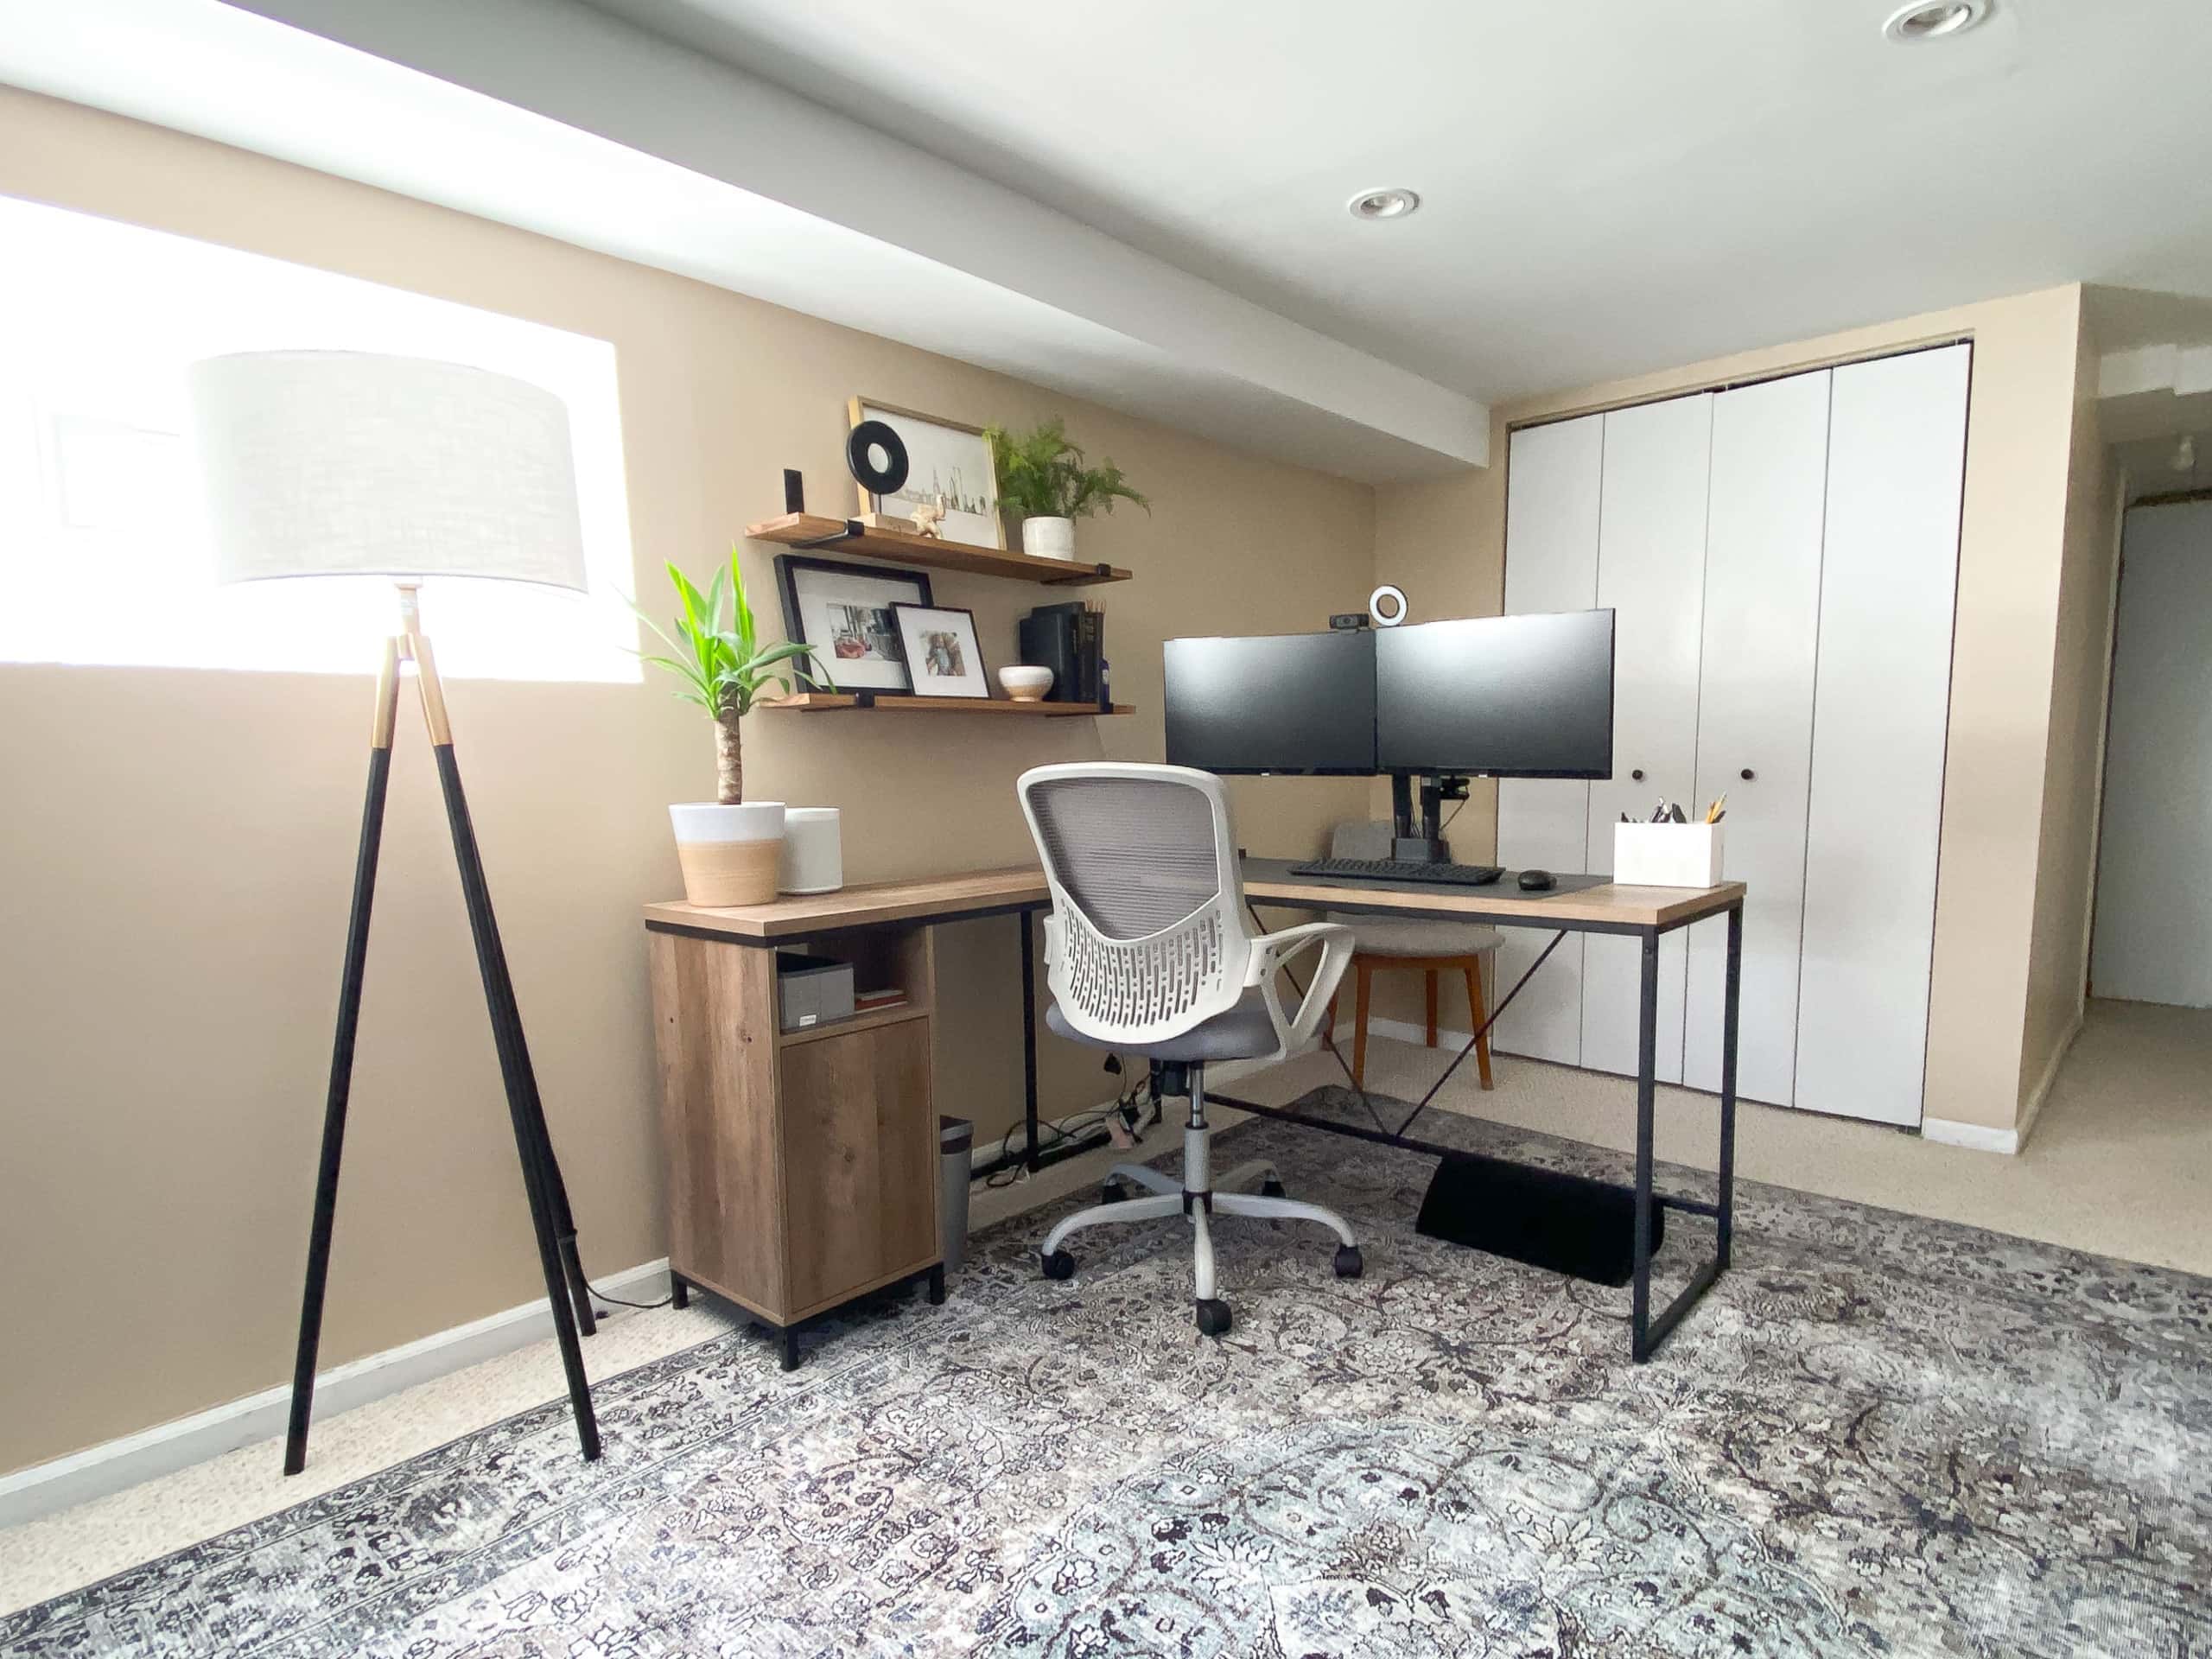 Tips to create a work from home setup in the basement